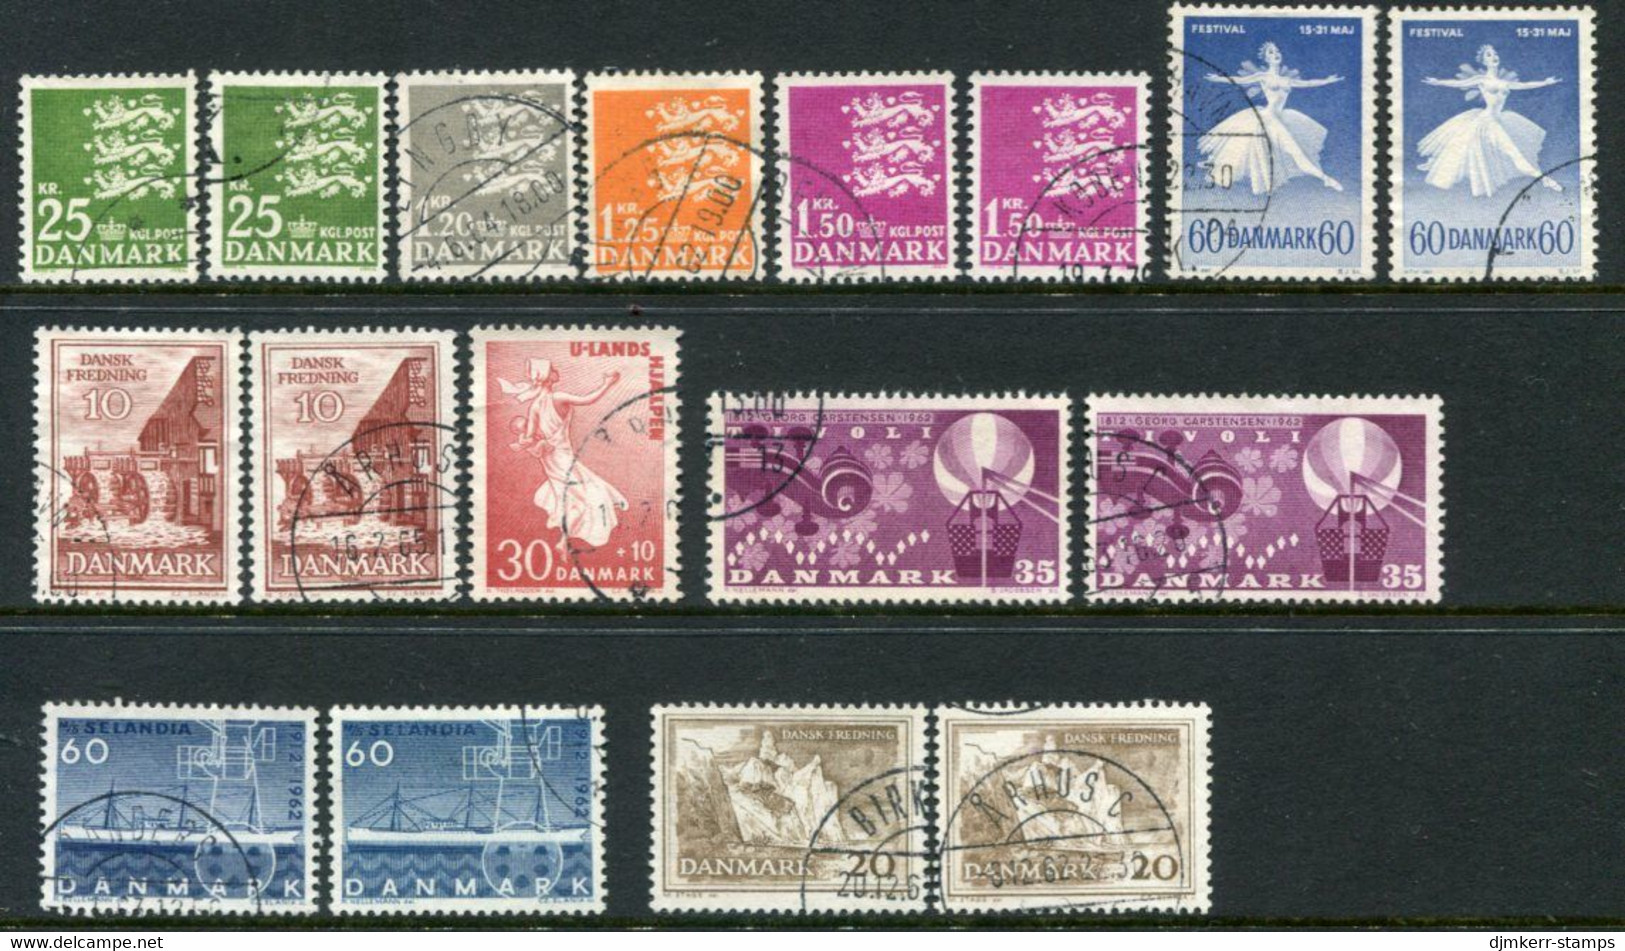 DENMARK 1962 Complete Issues With Ordinary And Fluorescent Papers, Used Michel 399x-408y - Gebruikt